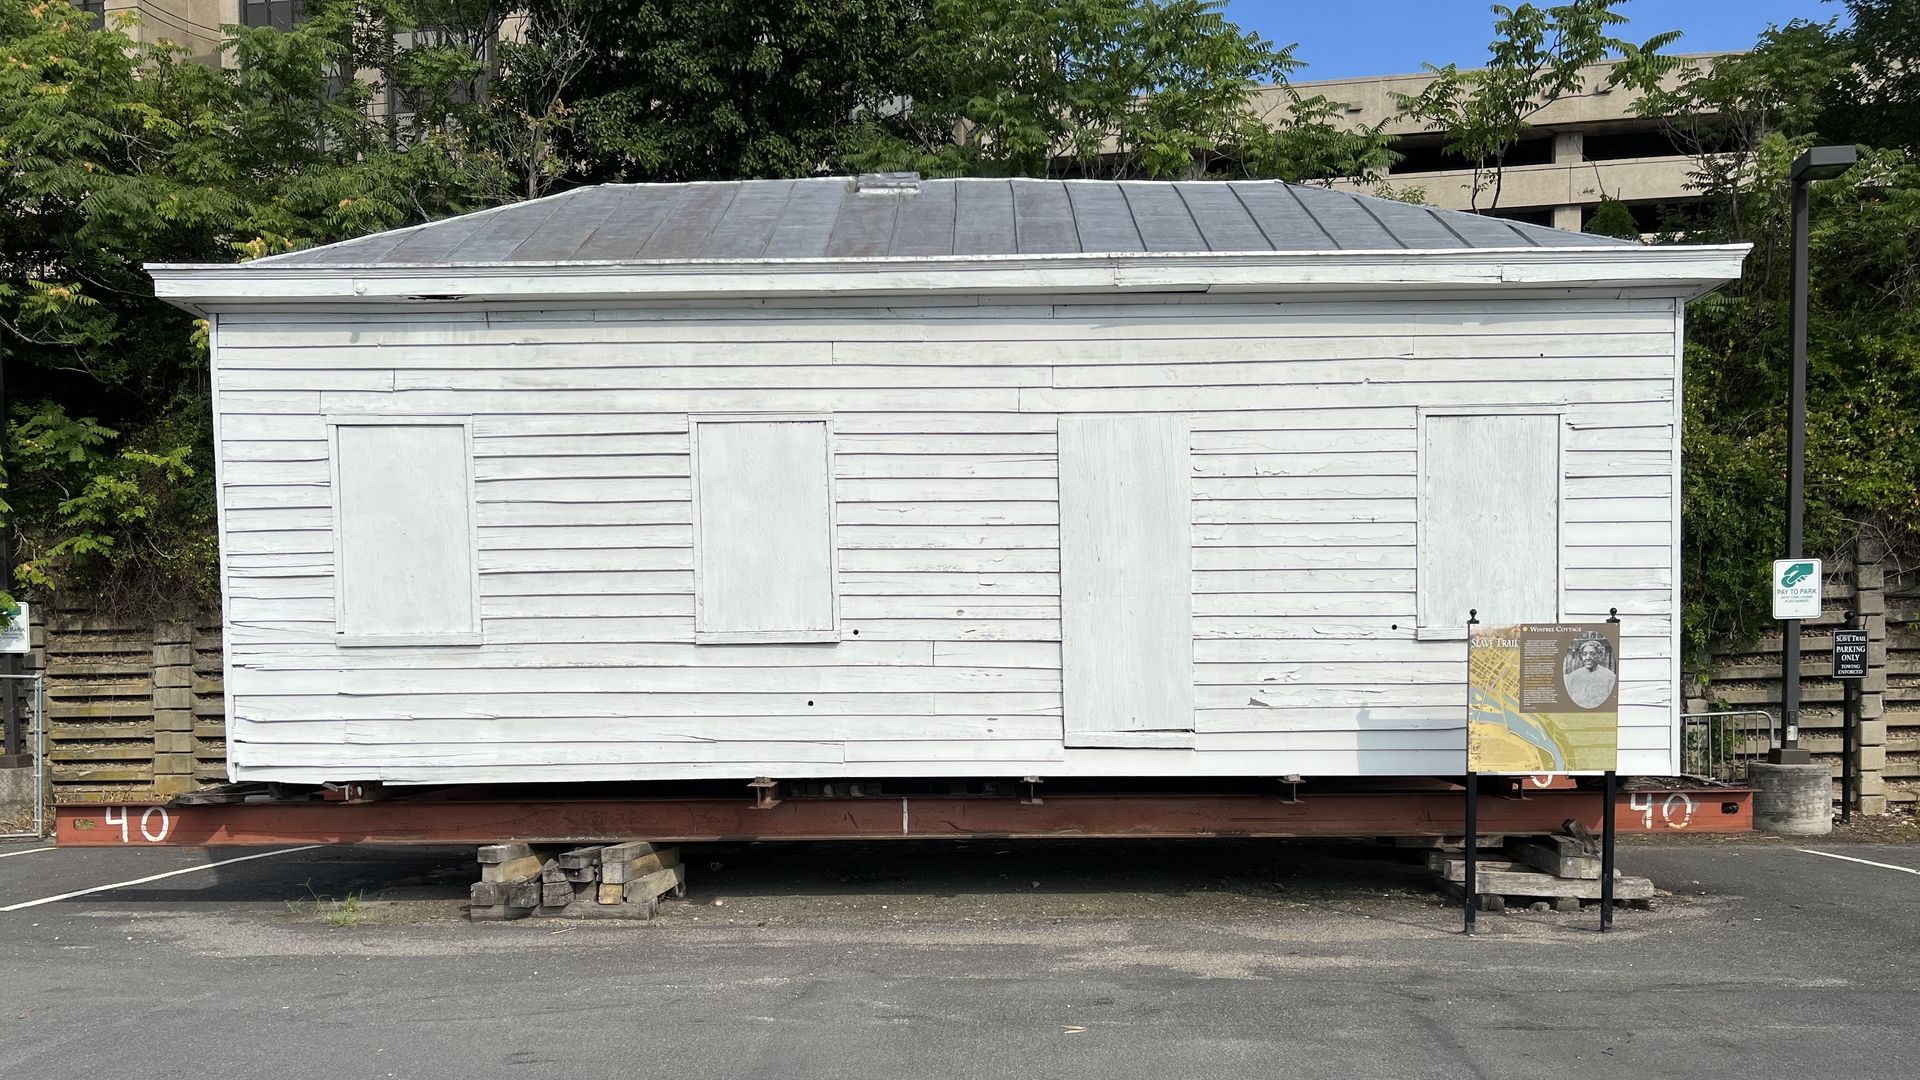 An old, boarded up white building on a trailer. 